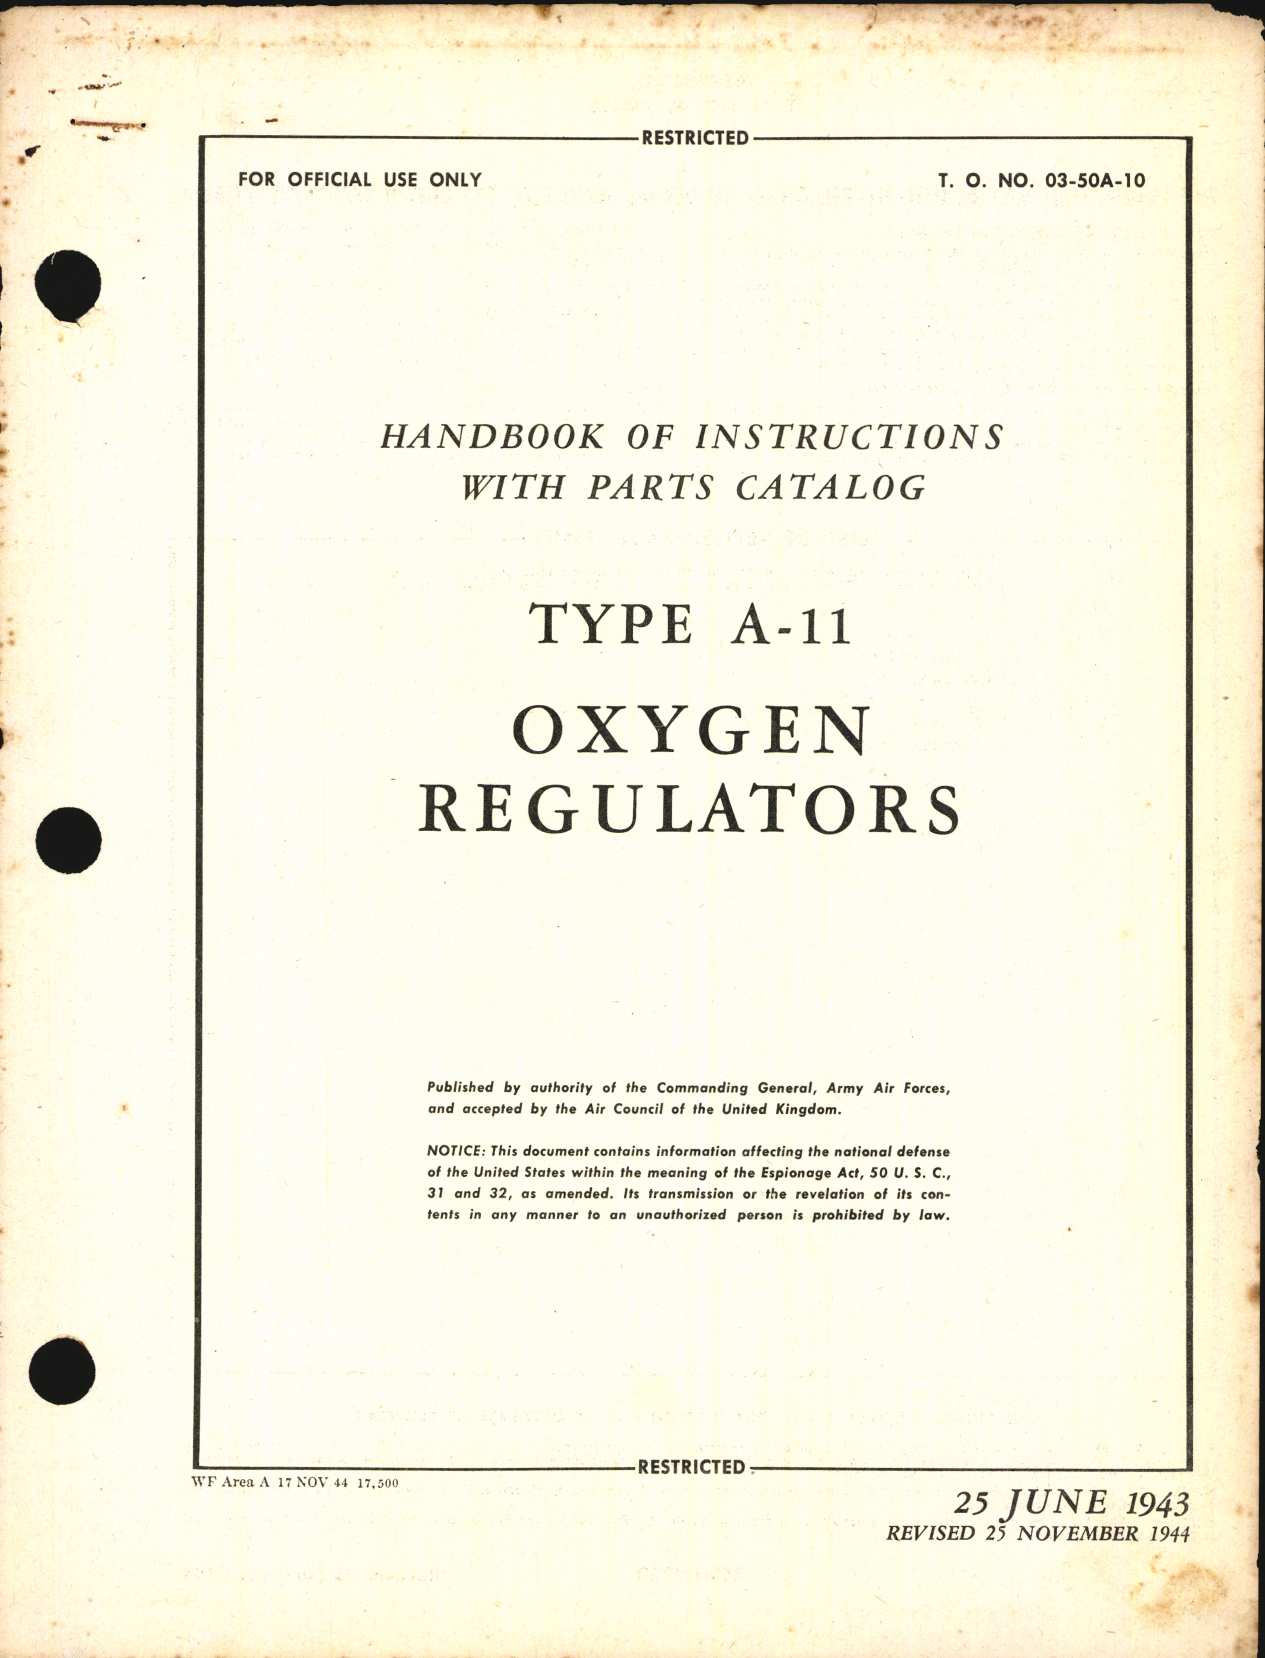 Sample page 1 from AirCorps Library document: Handbook of Instructions with Parts Catalog for Type A-11 Oxygen Regulators